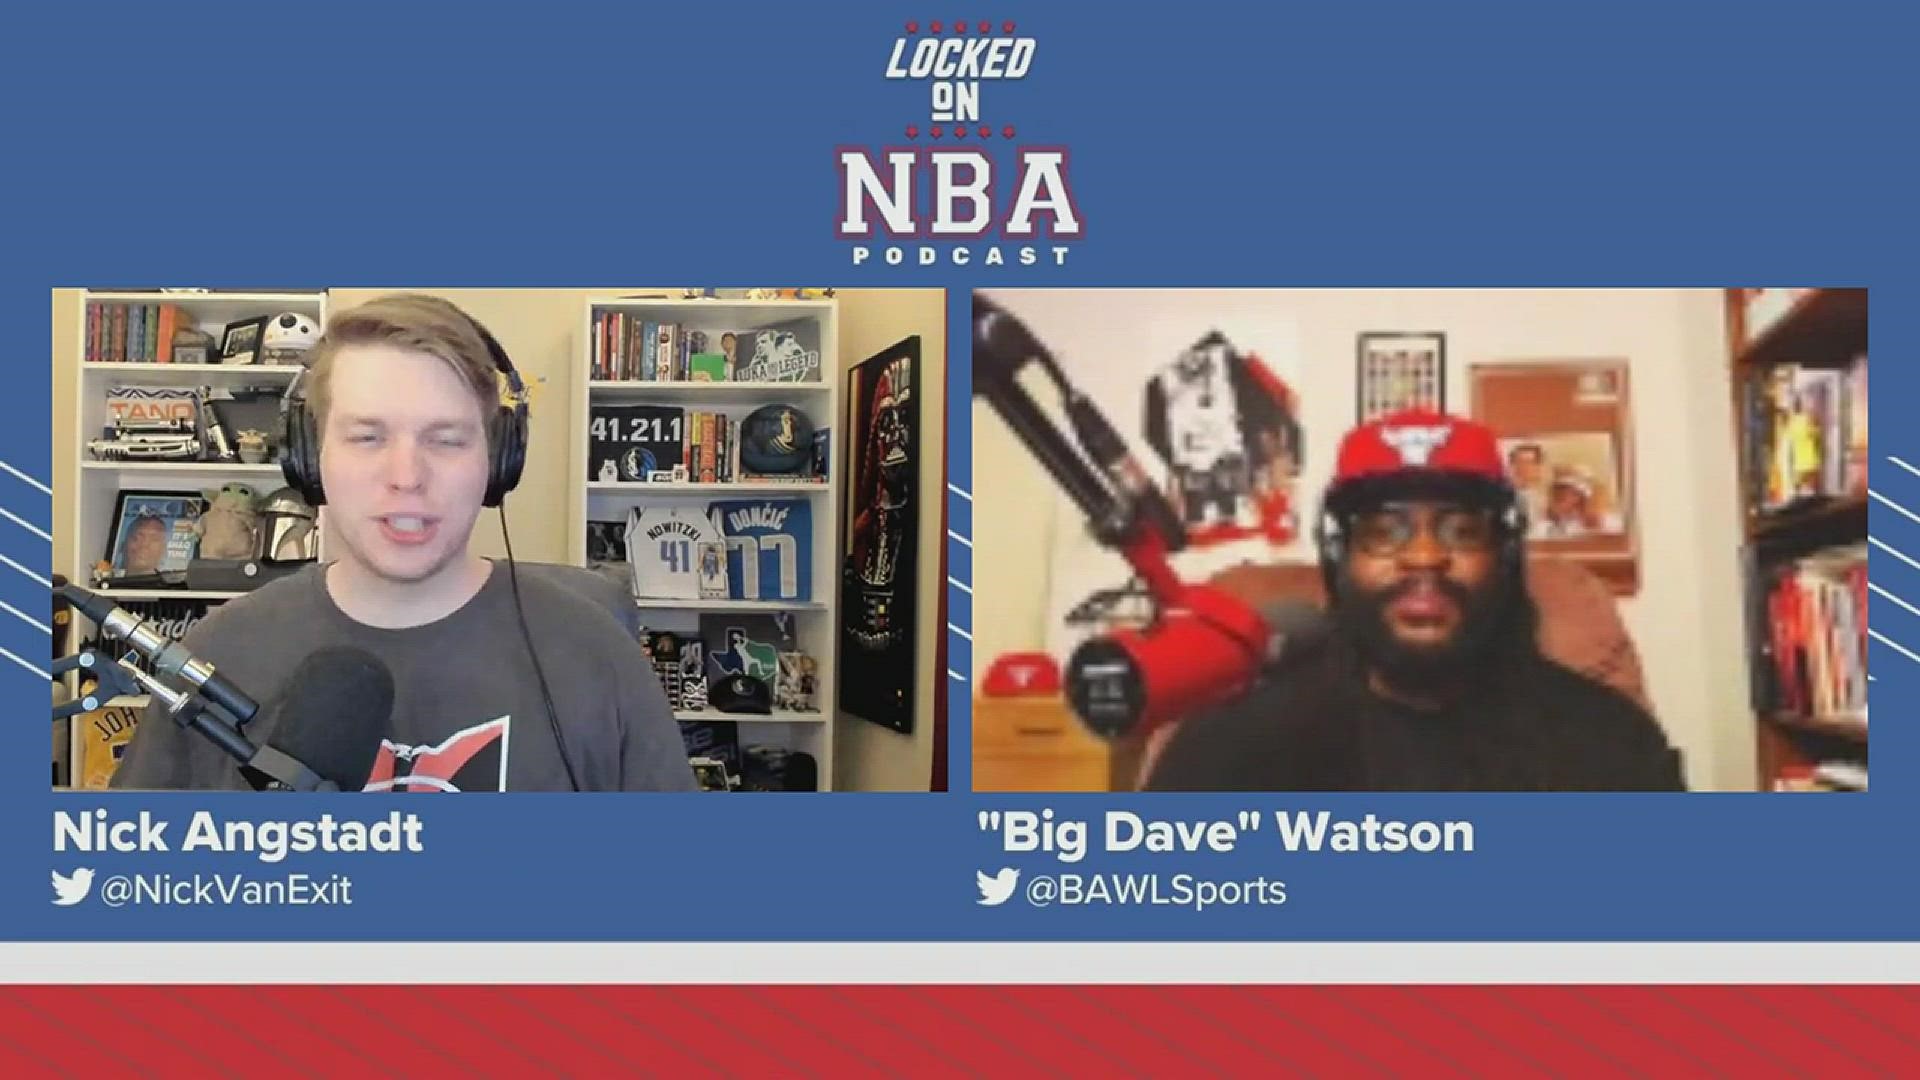 On the Locked On NBA podcast, ‘Big Dave’ Watson and Nick Angstadt discuss trade rumors for all 30 NBA teams ahead of Thursday's deadline.